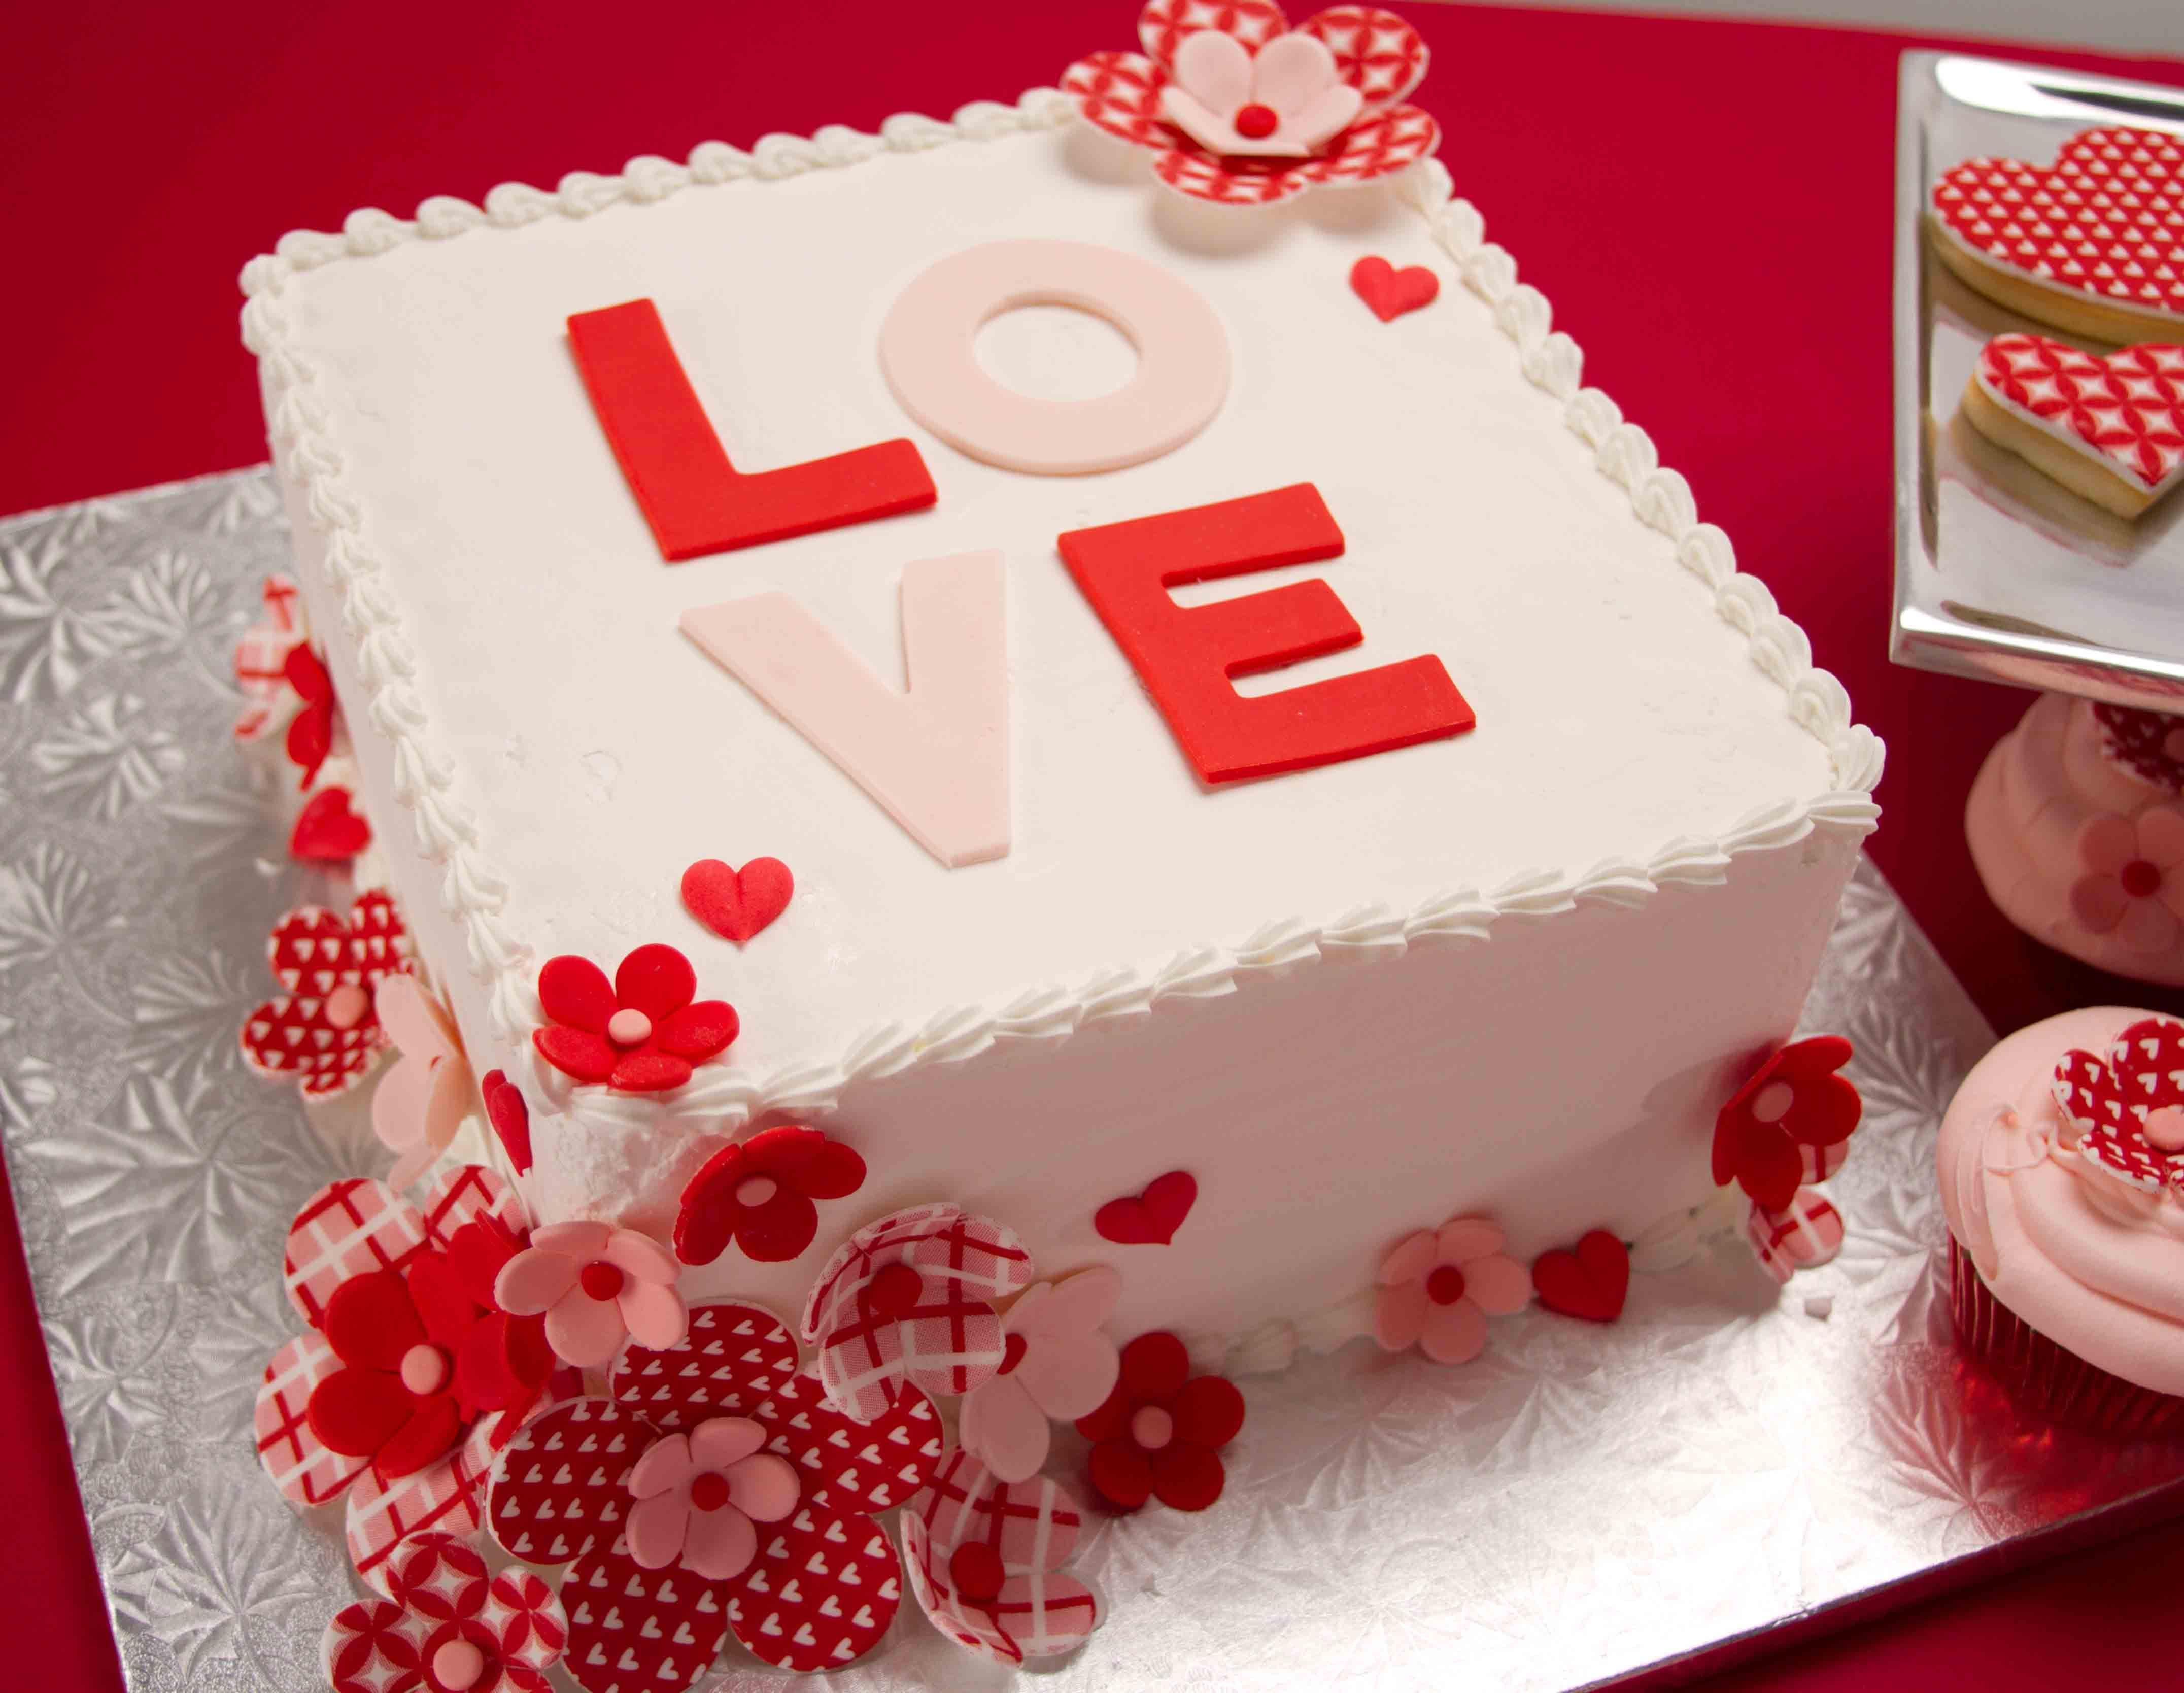 Birthday Cake For Husband Beautiful Birthday Cake For Husband Wife Valentines Day Or